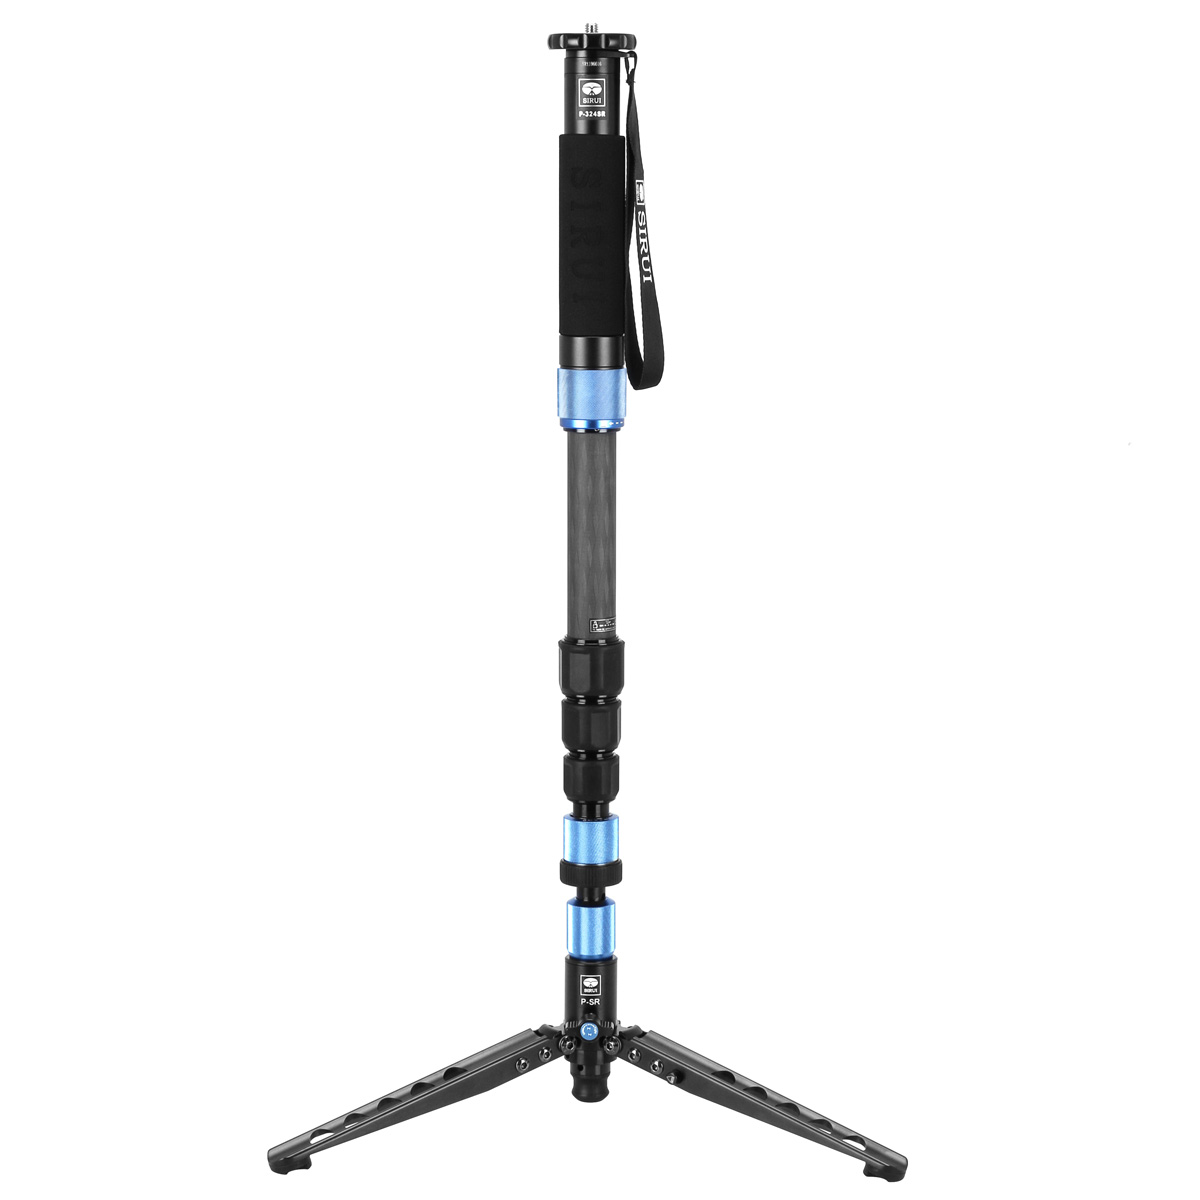 SIRUI P-324S Carbon Fibre Monopod with Support Feet 